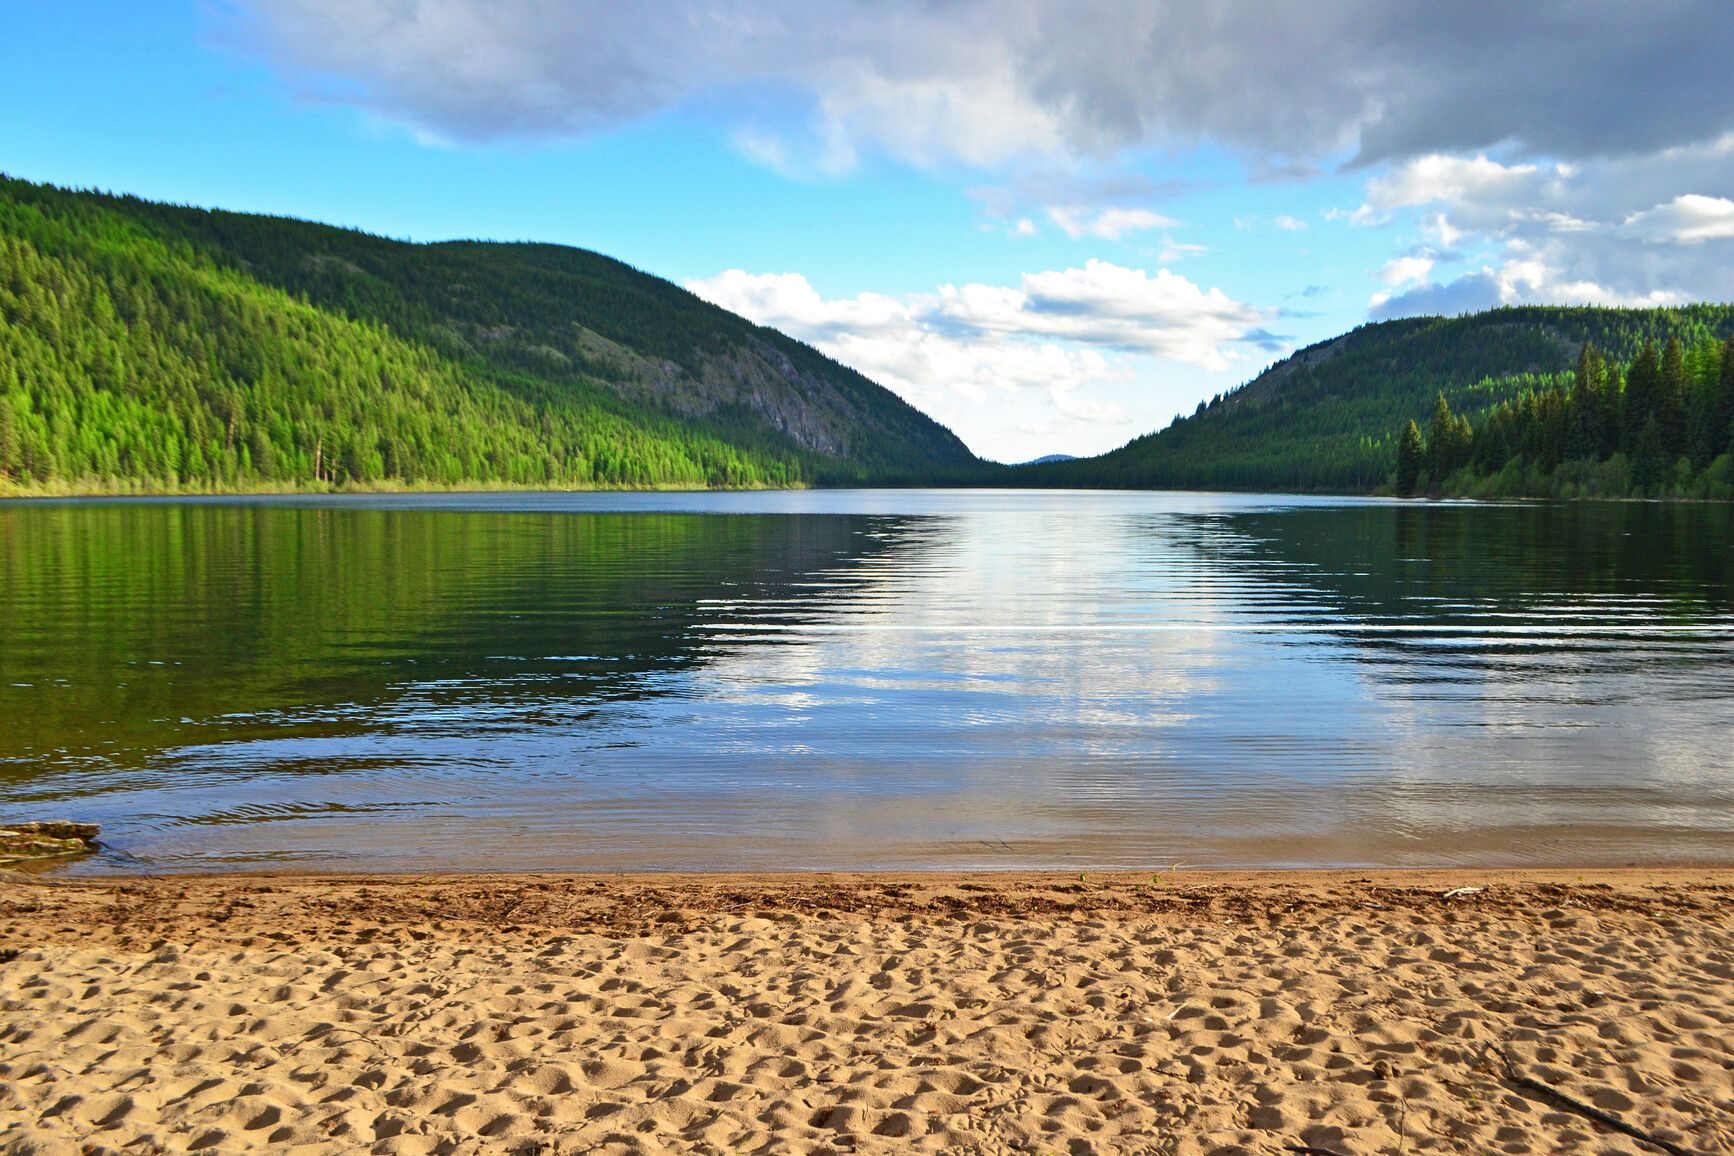 Discover the serene beauty of Conkle Lake Park with its sandy beach and breathtaking vistas of forest-covered mountains.